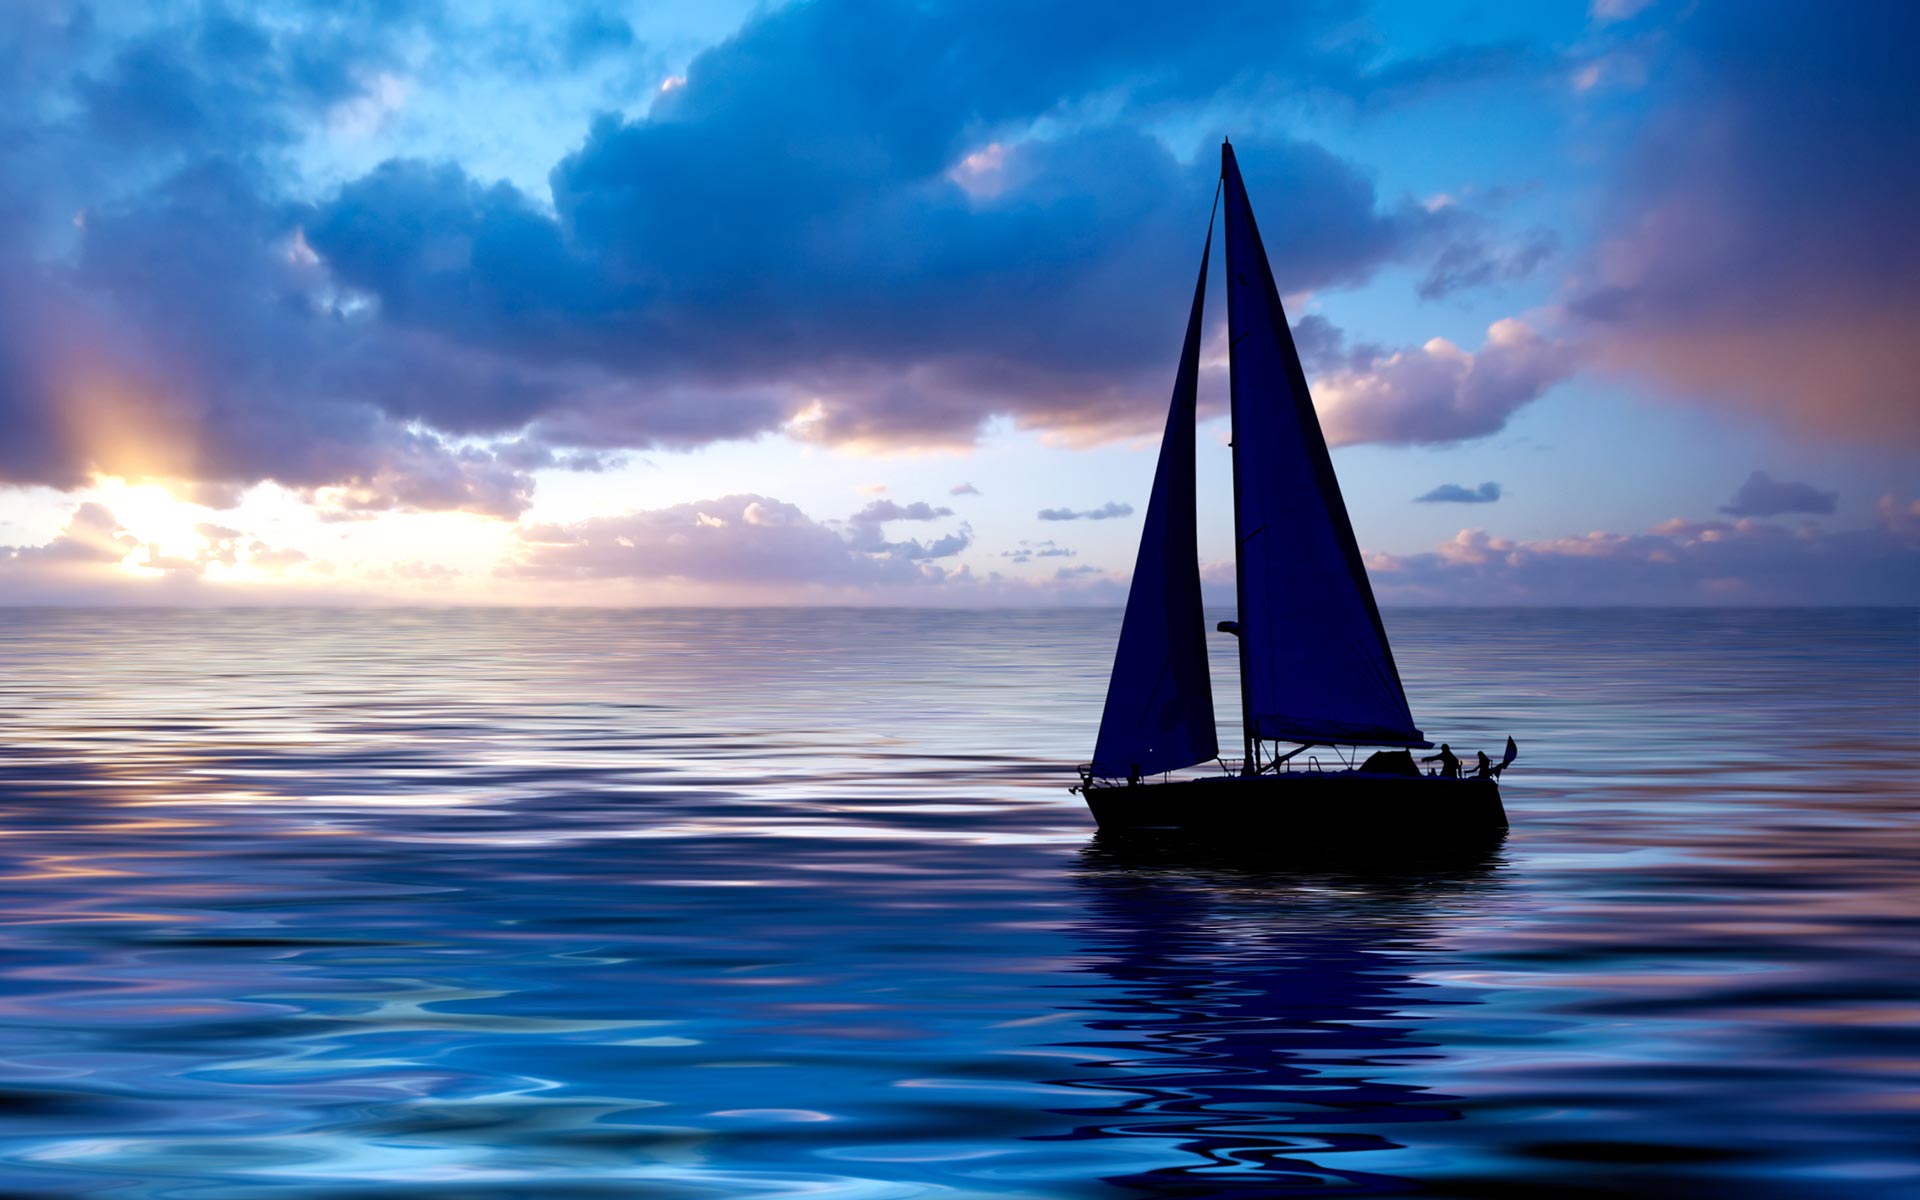 Nature Hd Wallpapers - Kitty 4 Alone On A Wide Wide Sea - HD Wallpaper 